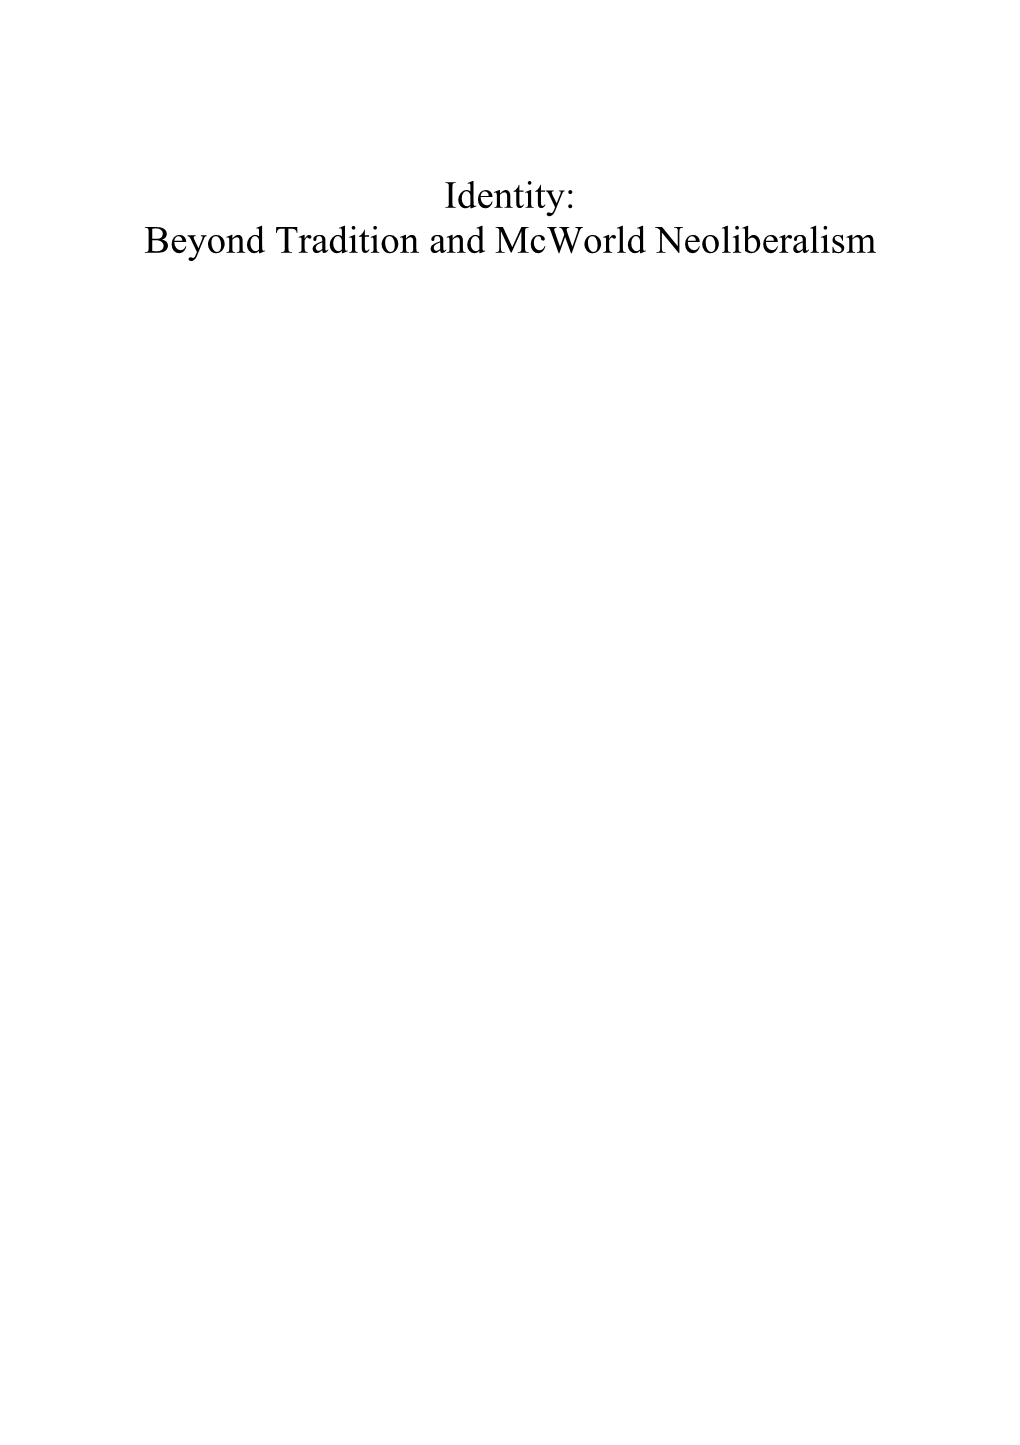 Identity: Beyond Tradition and Mcworld Neoliberalism